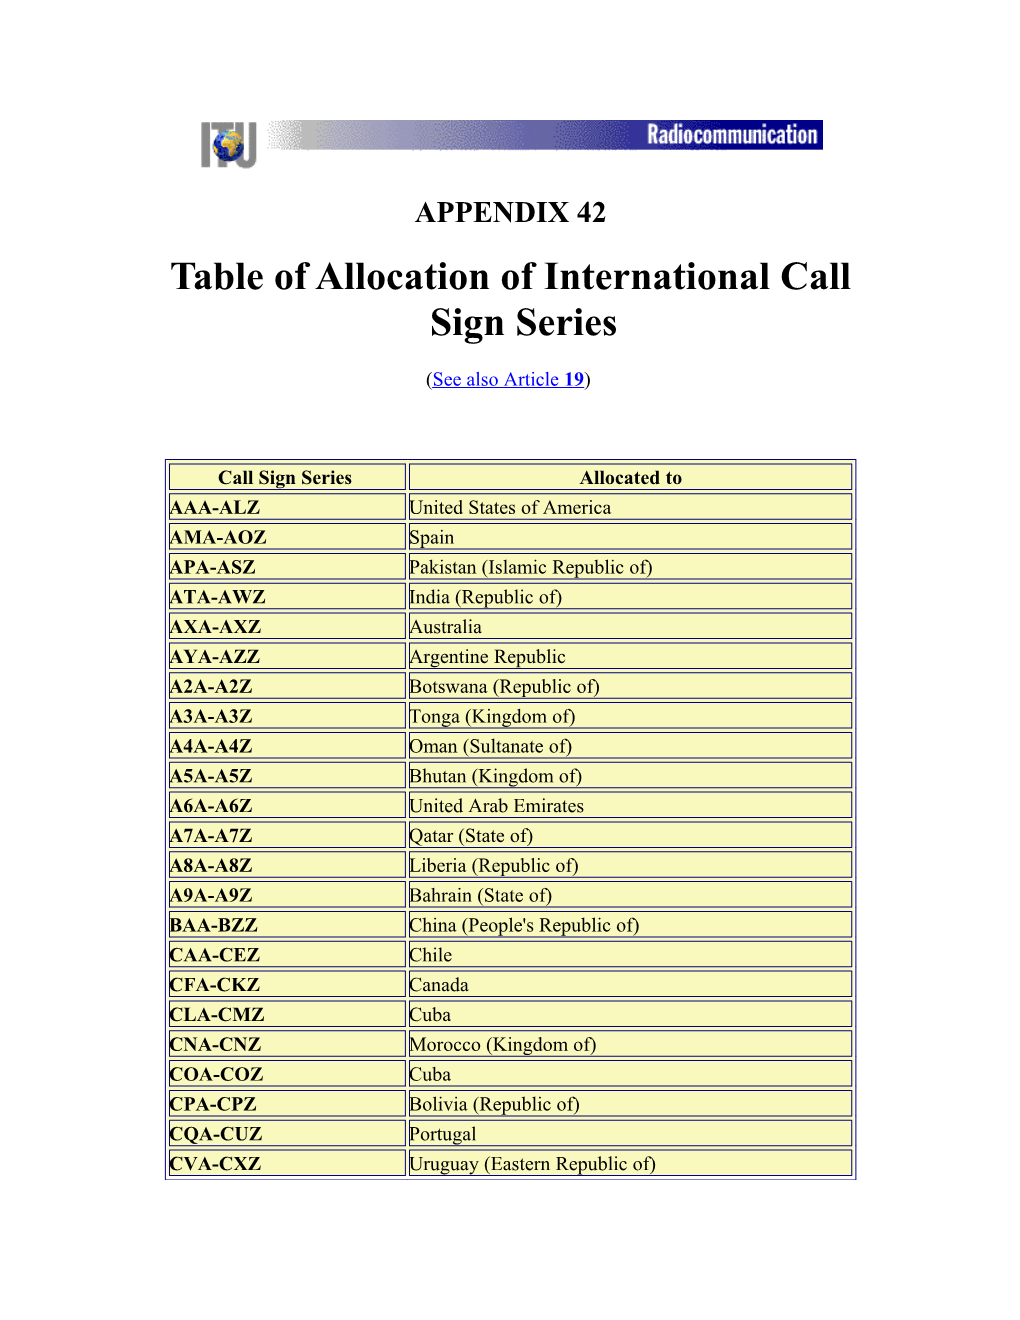 Table of Allocation of International Call Sign Series